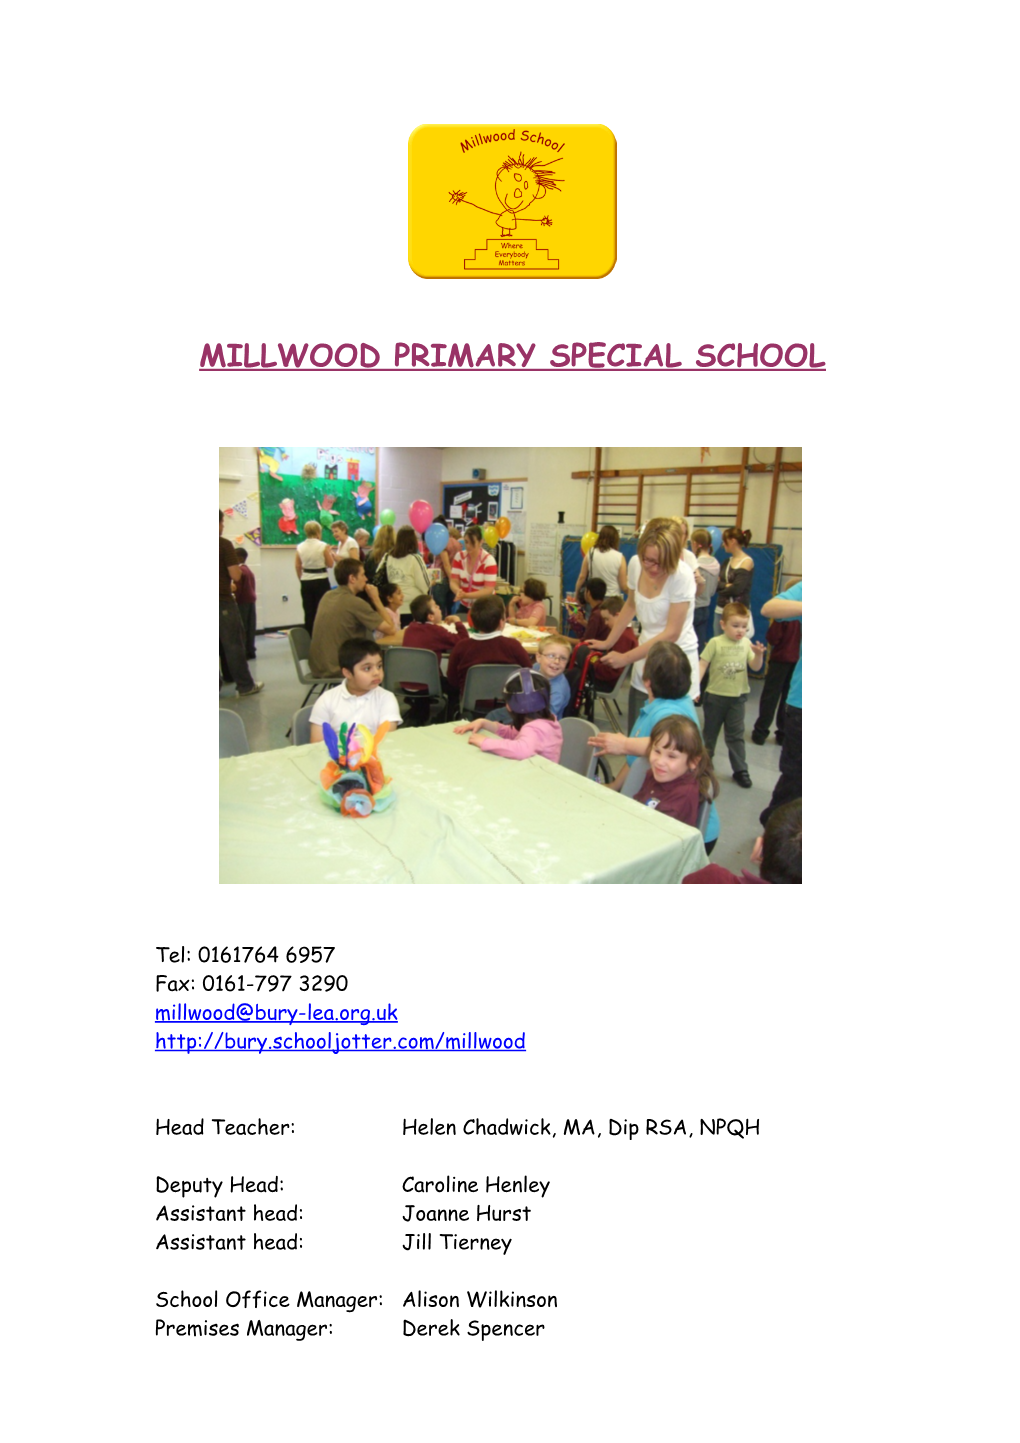 Millwood Primary Special School